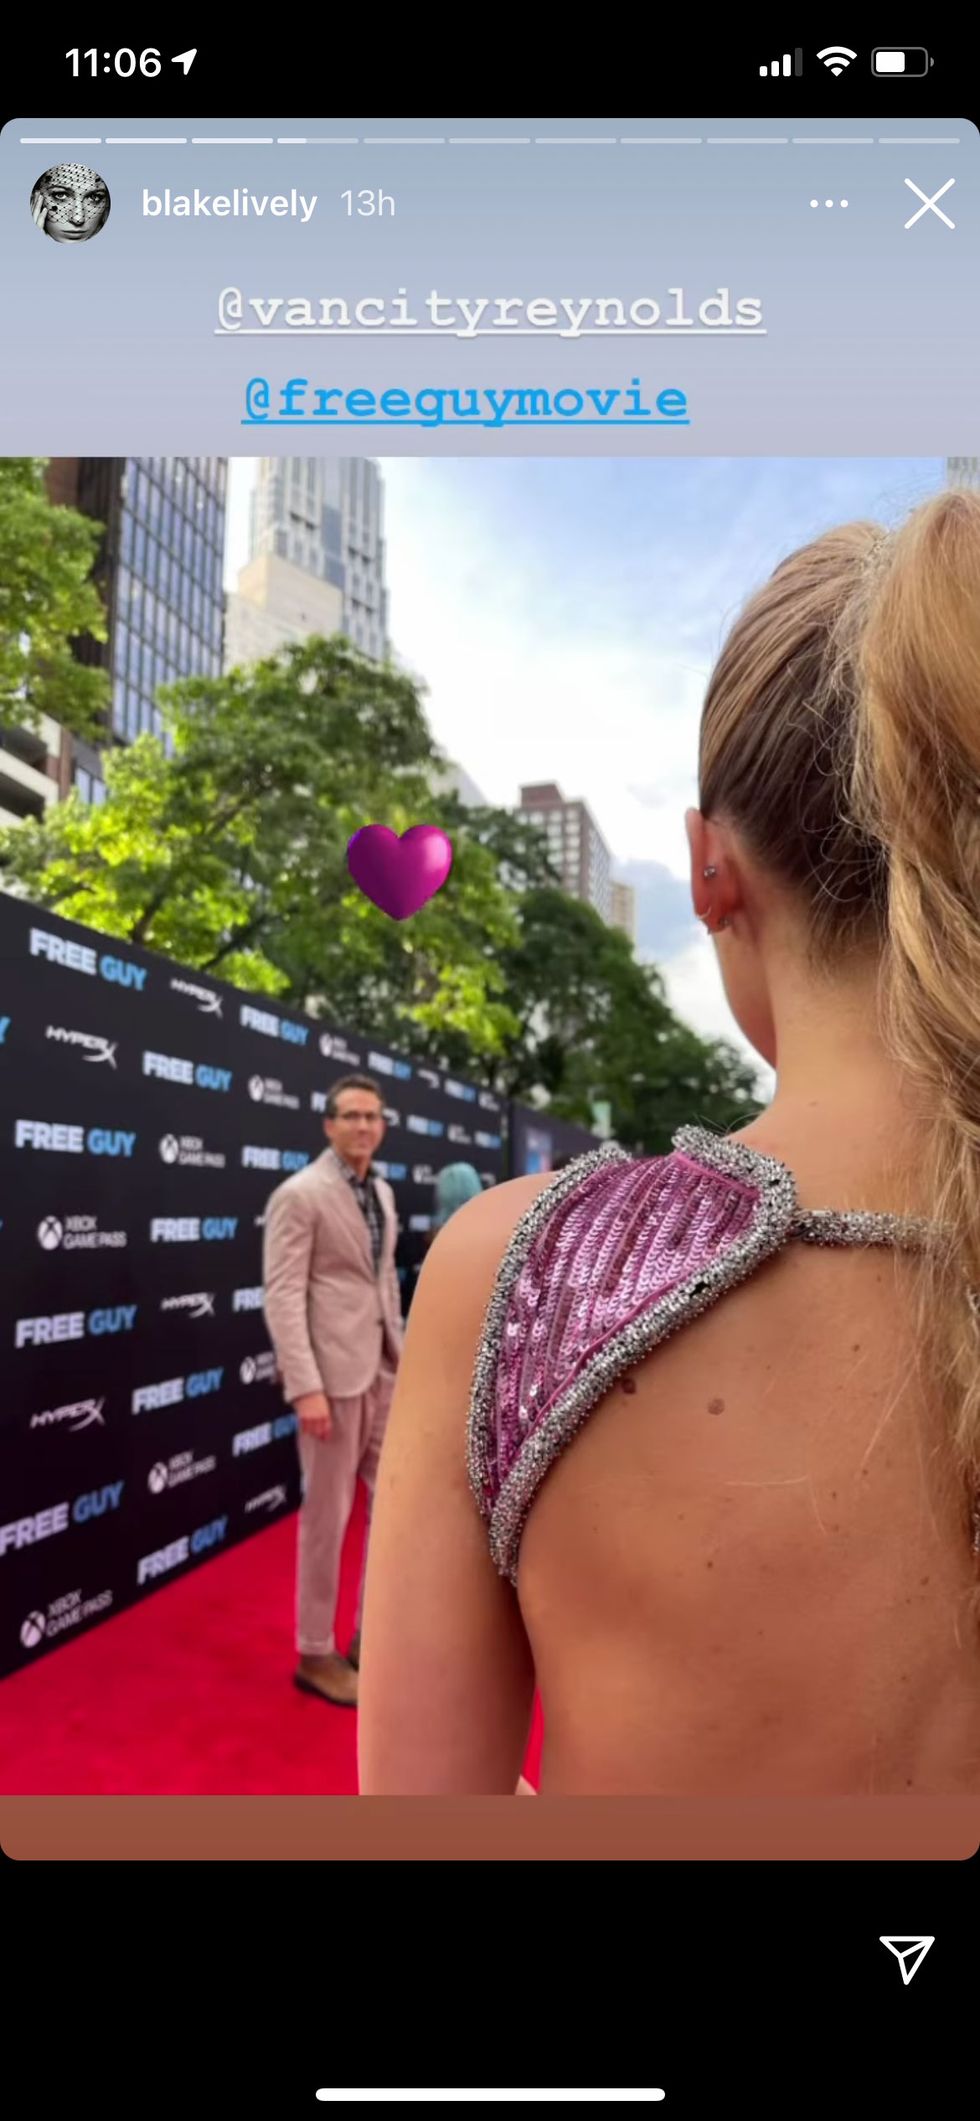 blake lively's behind the scene photos from the premiere